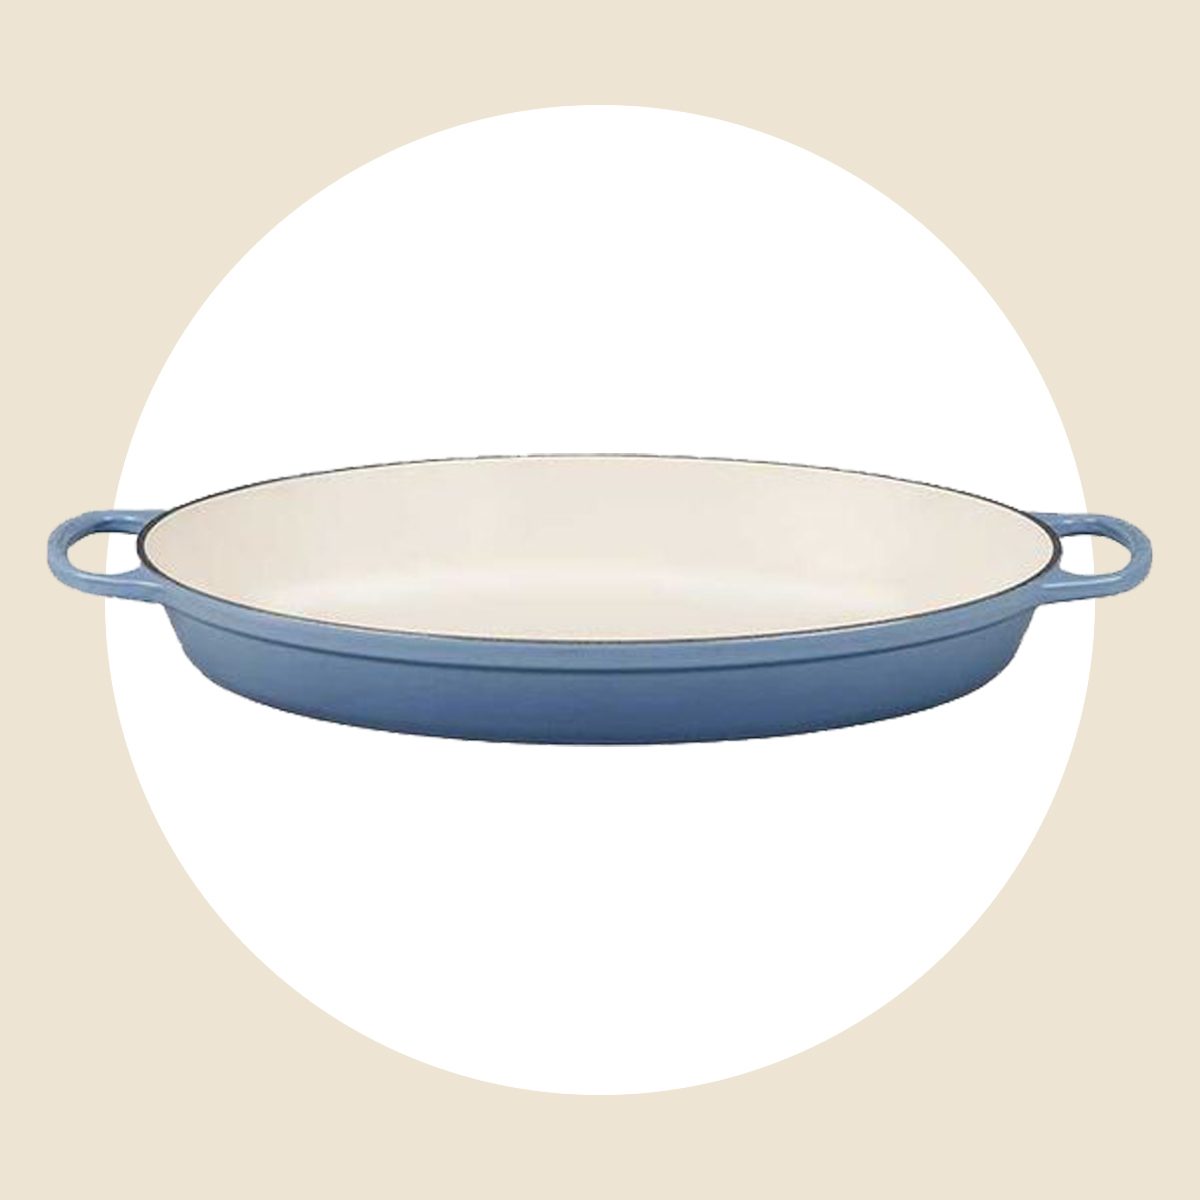 Le Creuset Classic 9 Chambray Enameled Cast Iron Skillet + Reviews